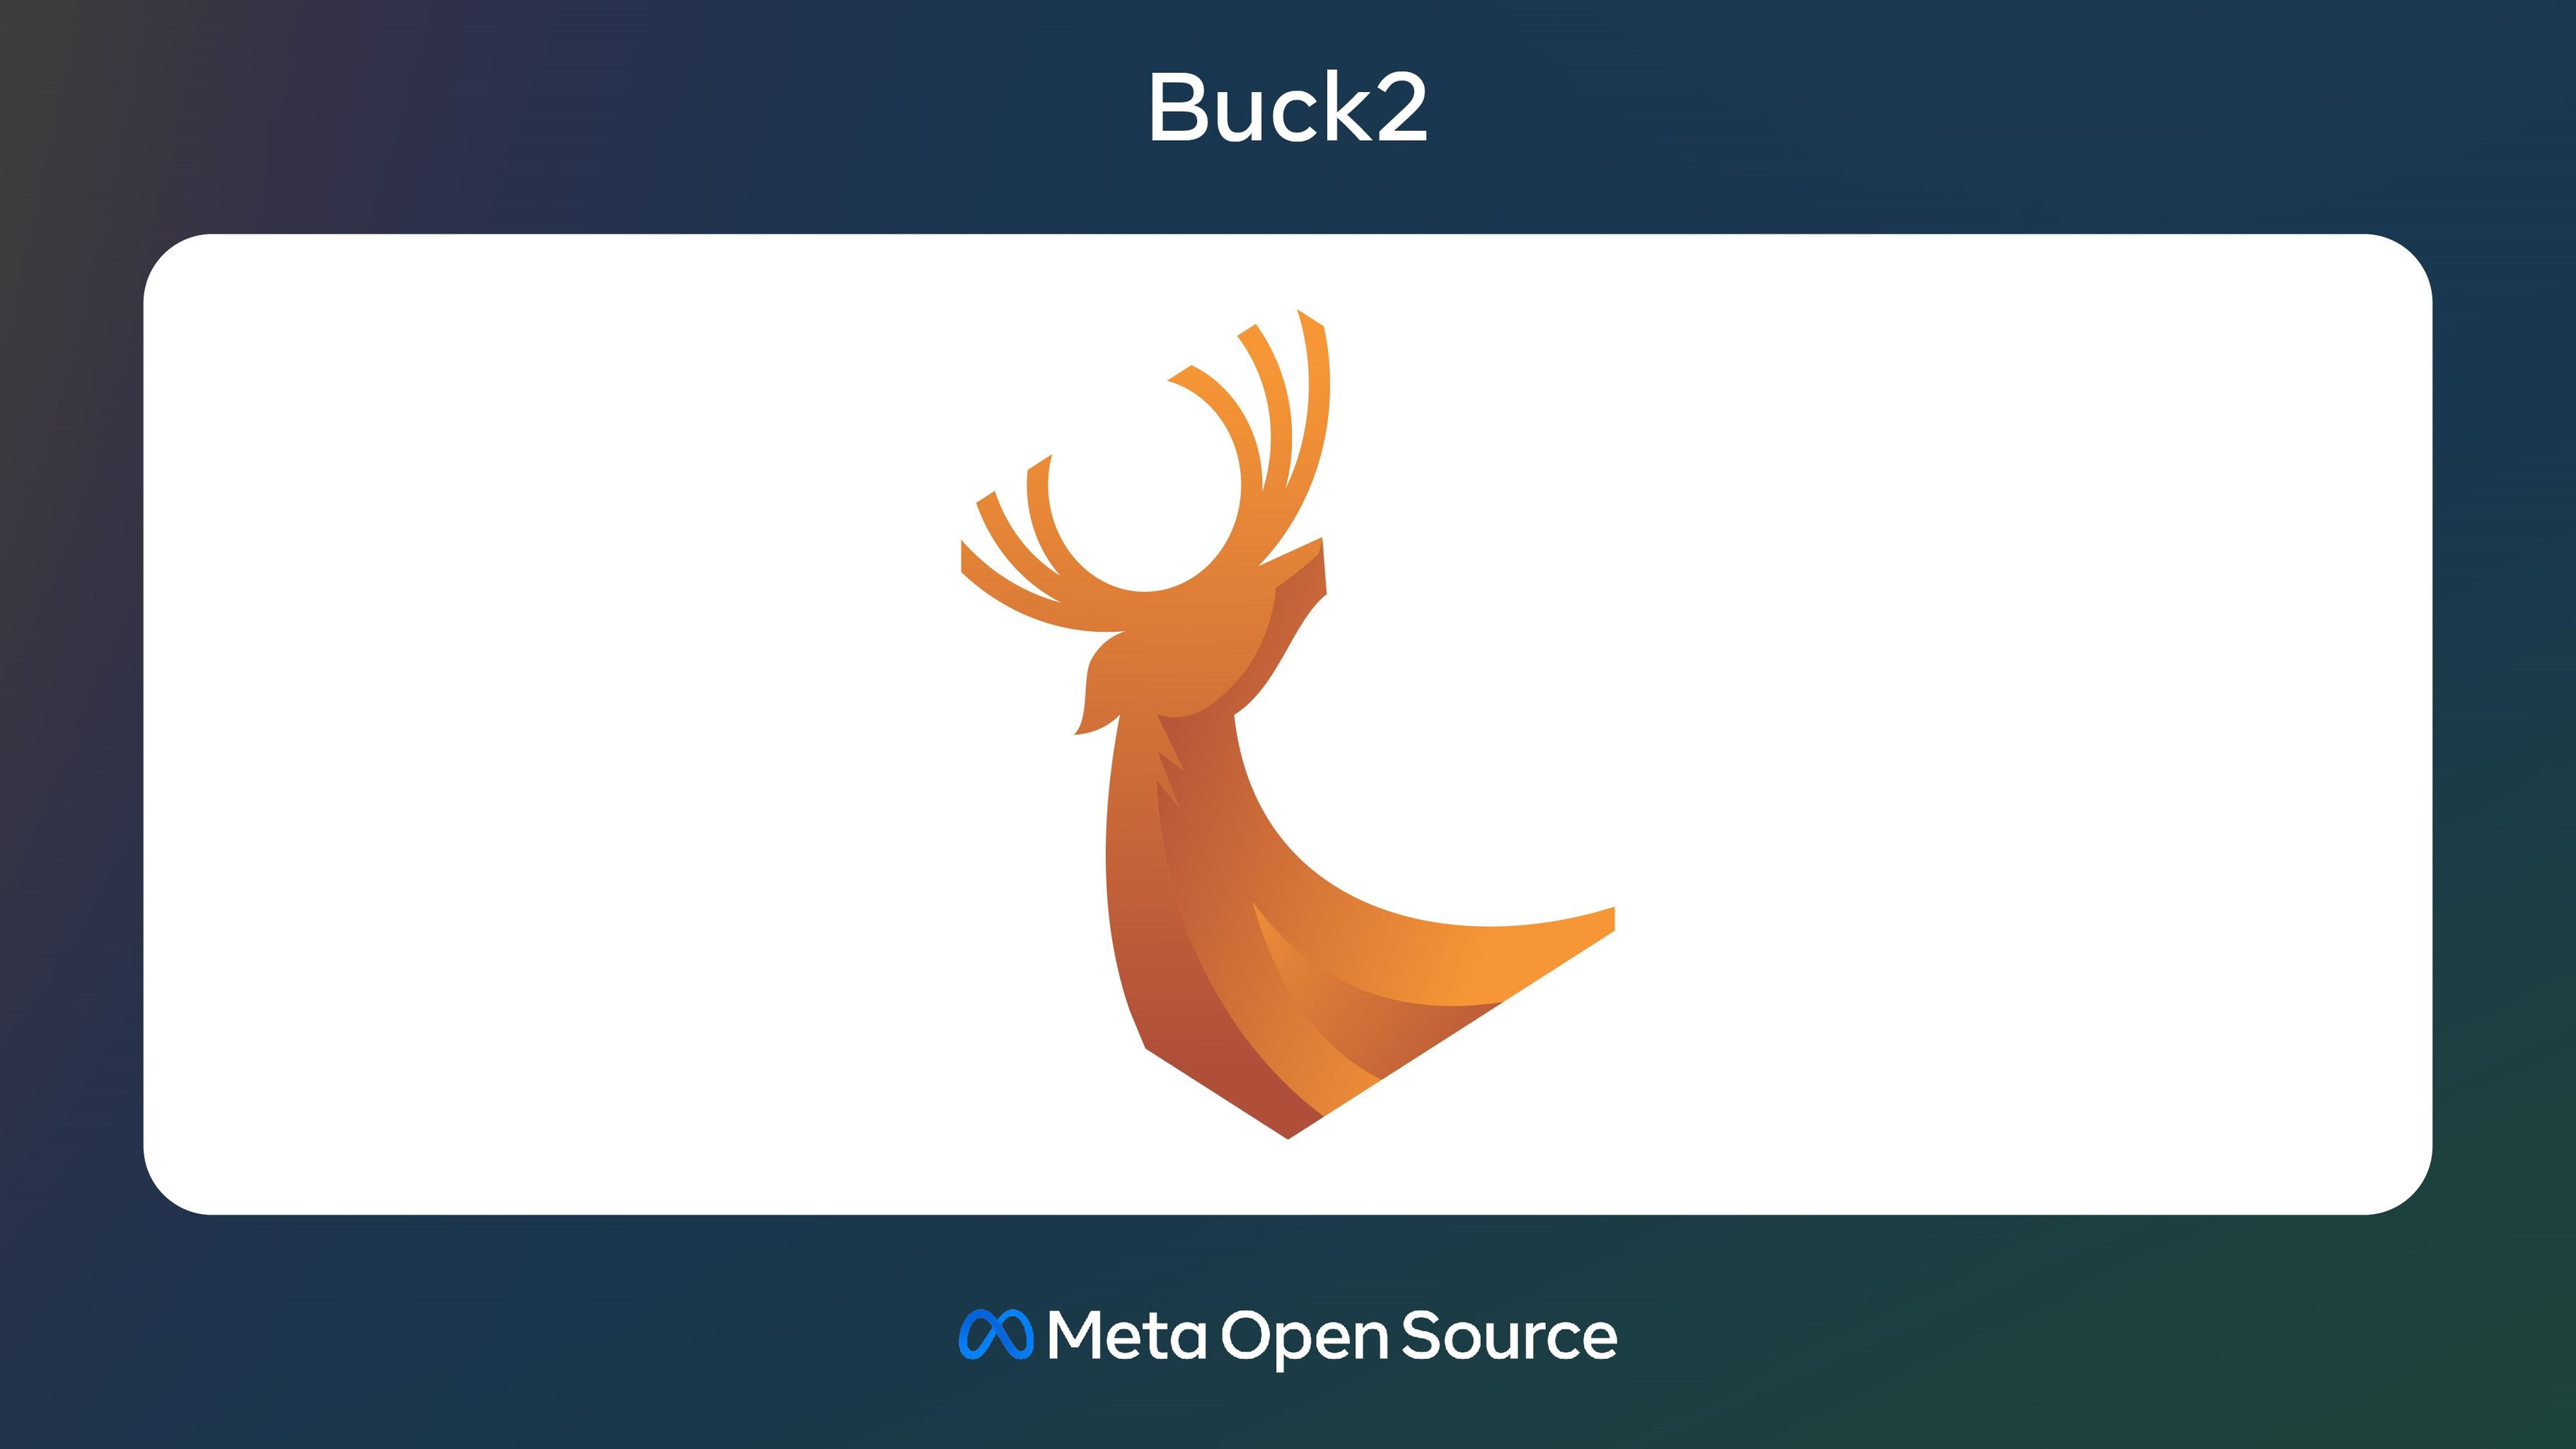 Build faster with Buck2: Our open source build system